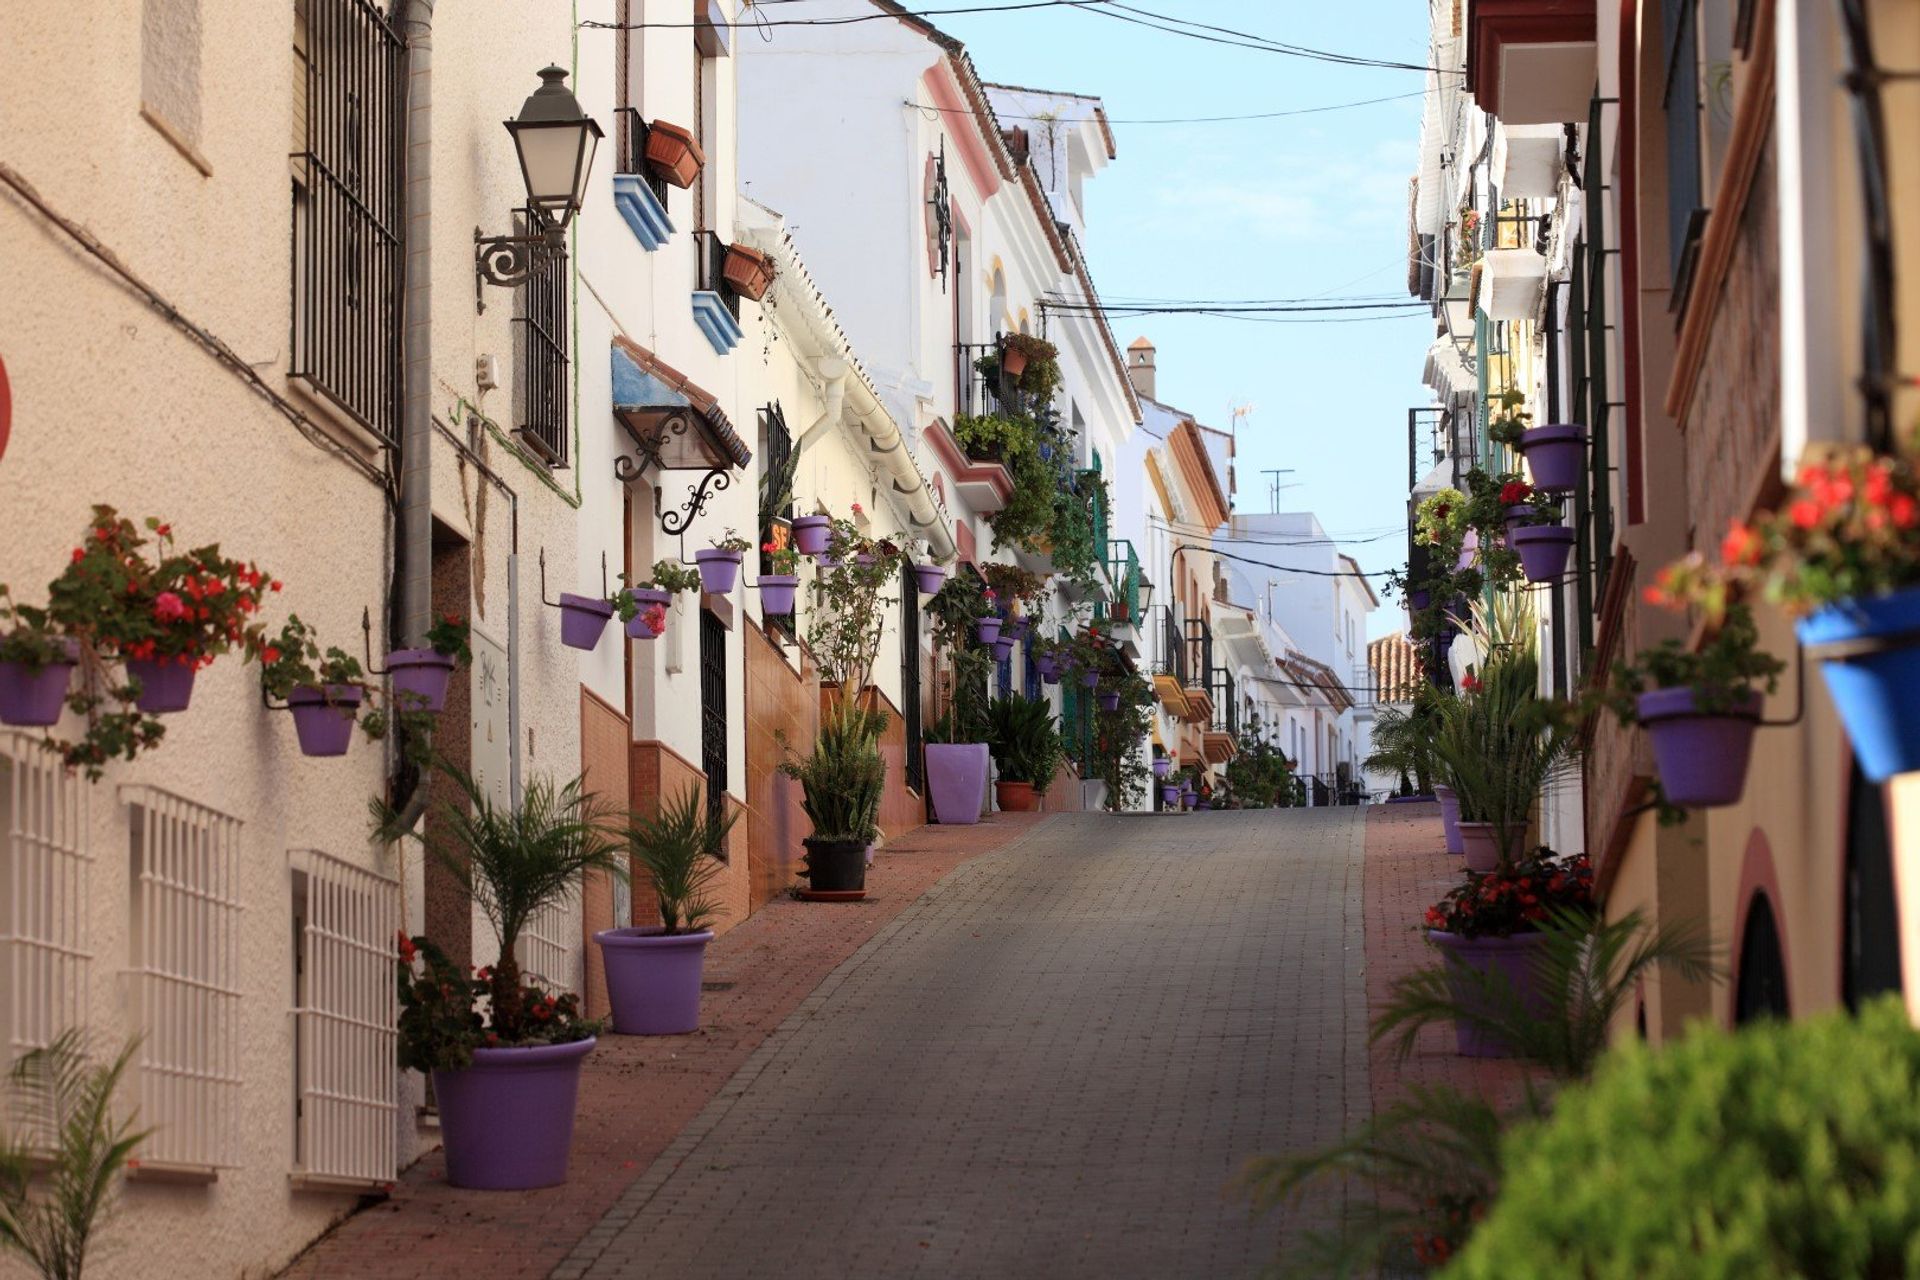 A typical street in Estepona Old Town, adorned with purple flower pots